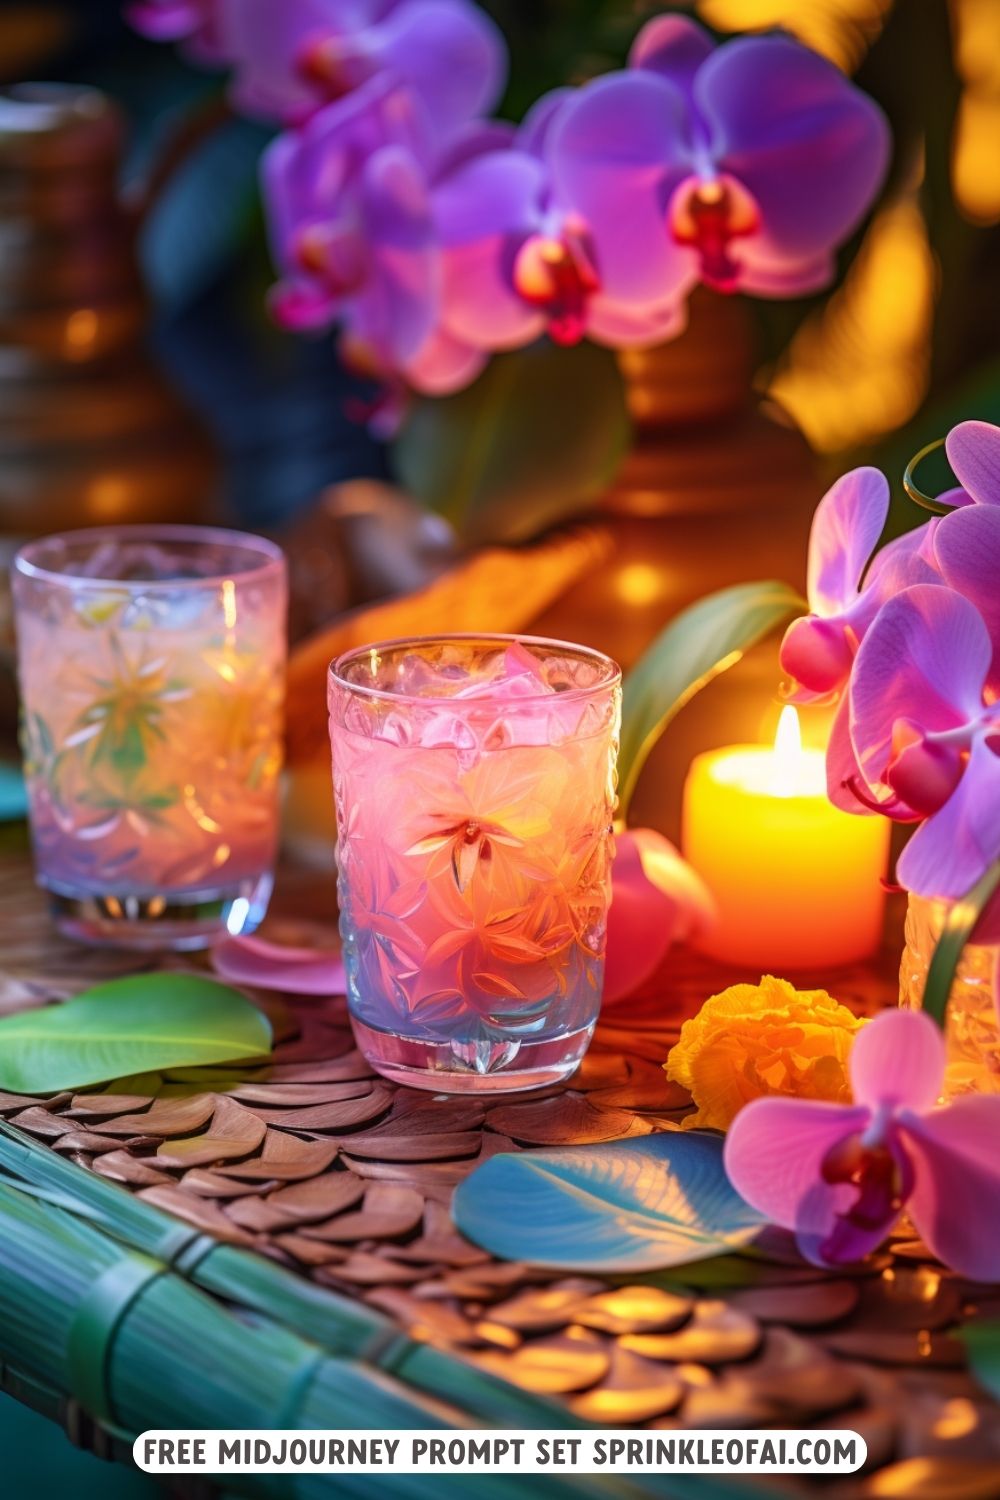 Free Midjourney Prompt Set - Happy Hour Cocktail Bar Prompts - Hawaii Fashion Prompts - Midjourney for Beginners - Sprinkle of AI